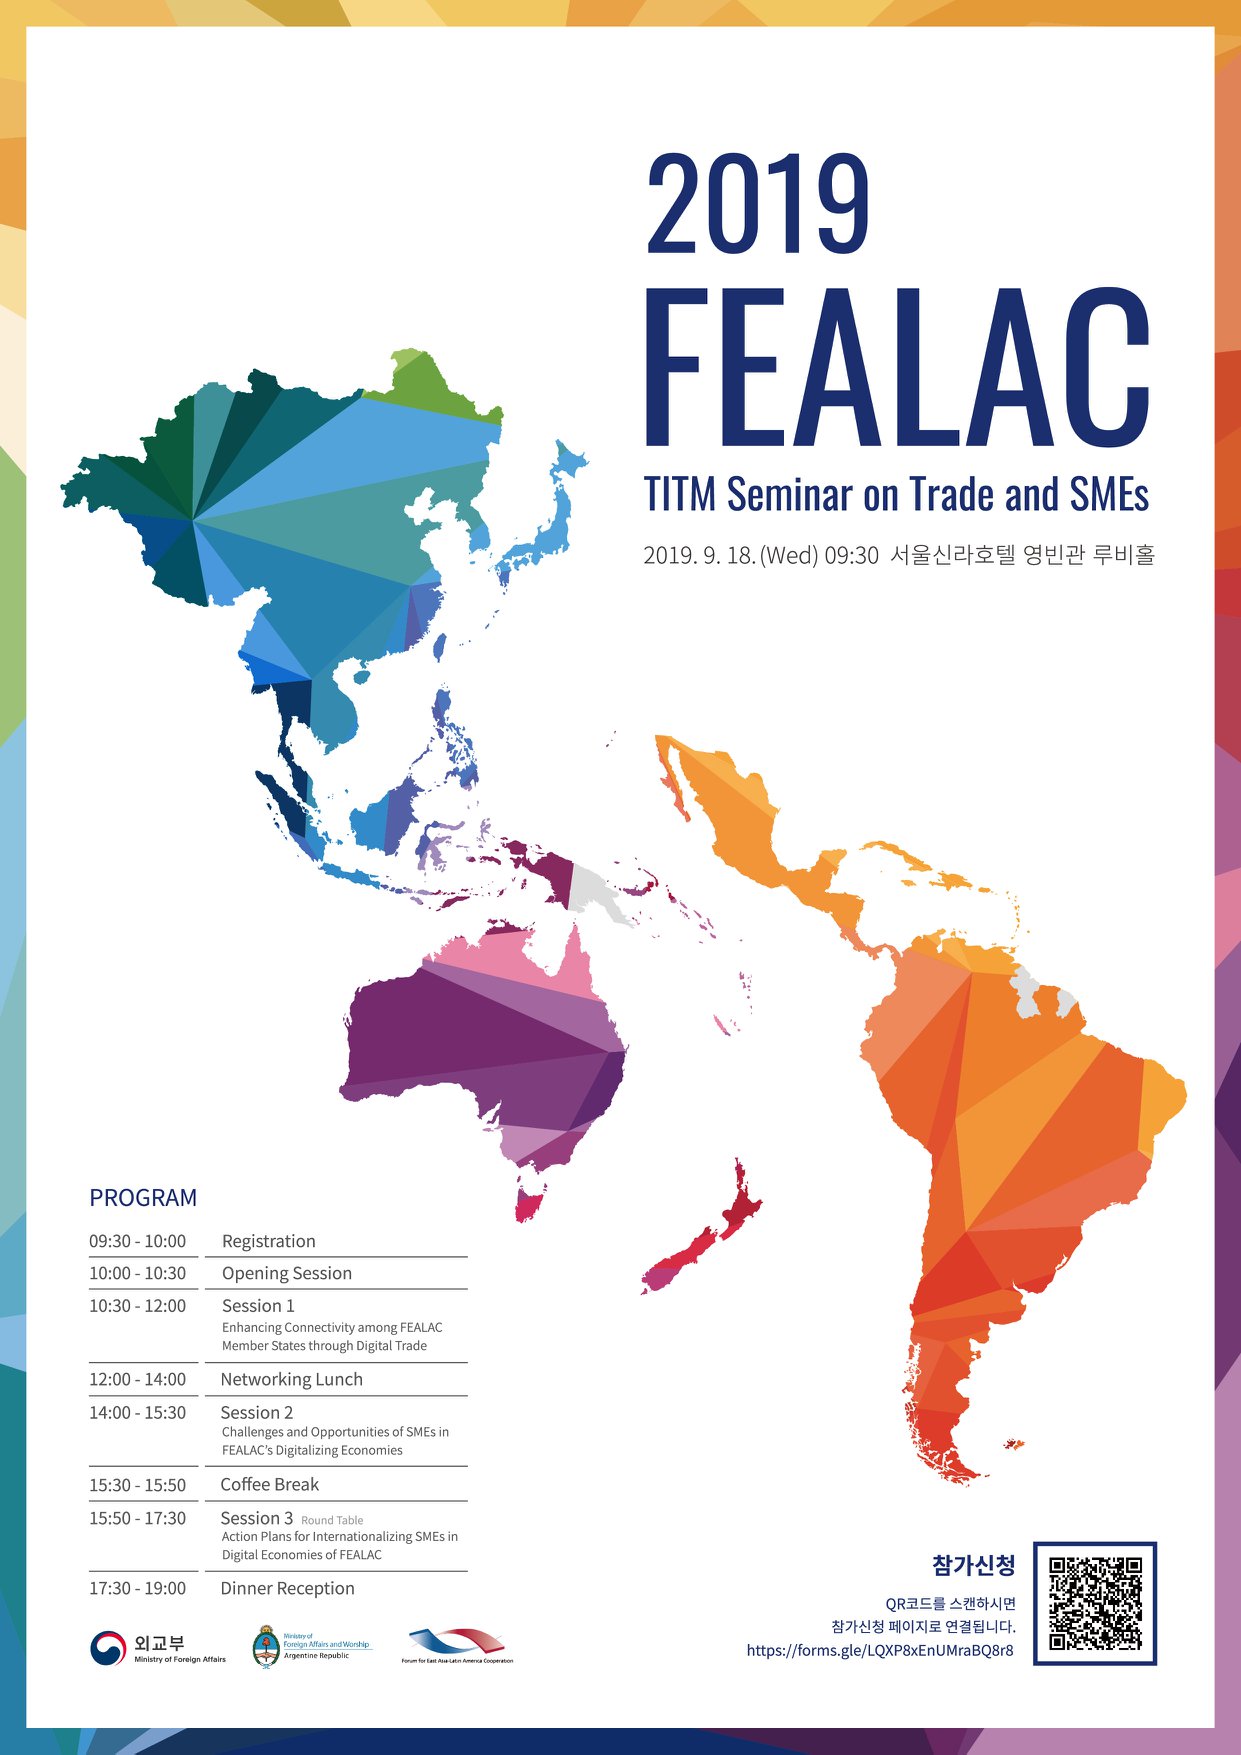 2019 FEALAC TITM Seminar on Trade and SMEs